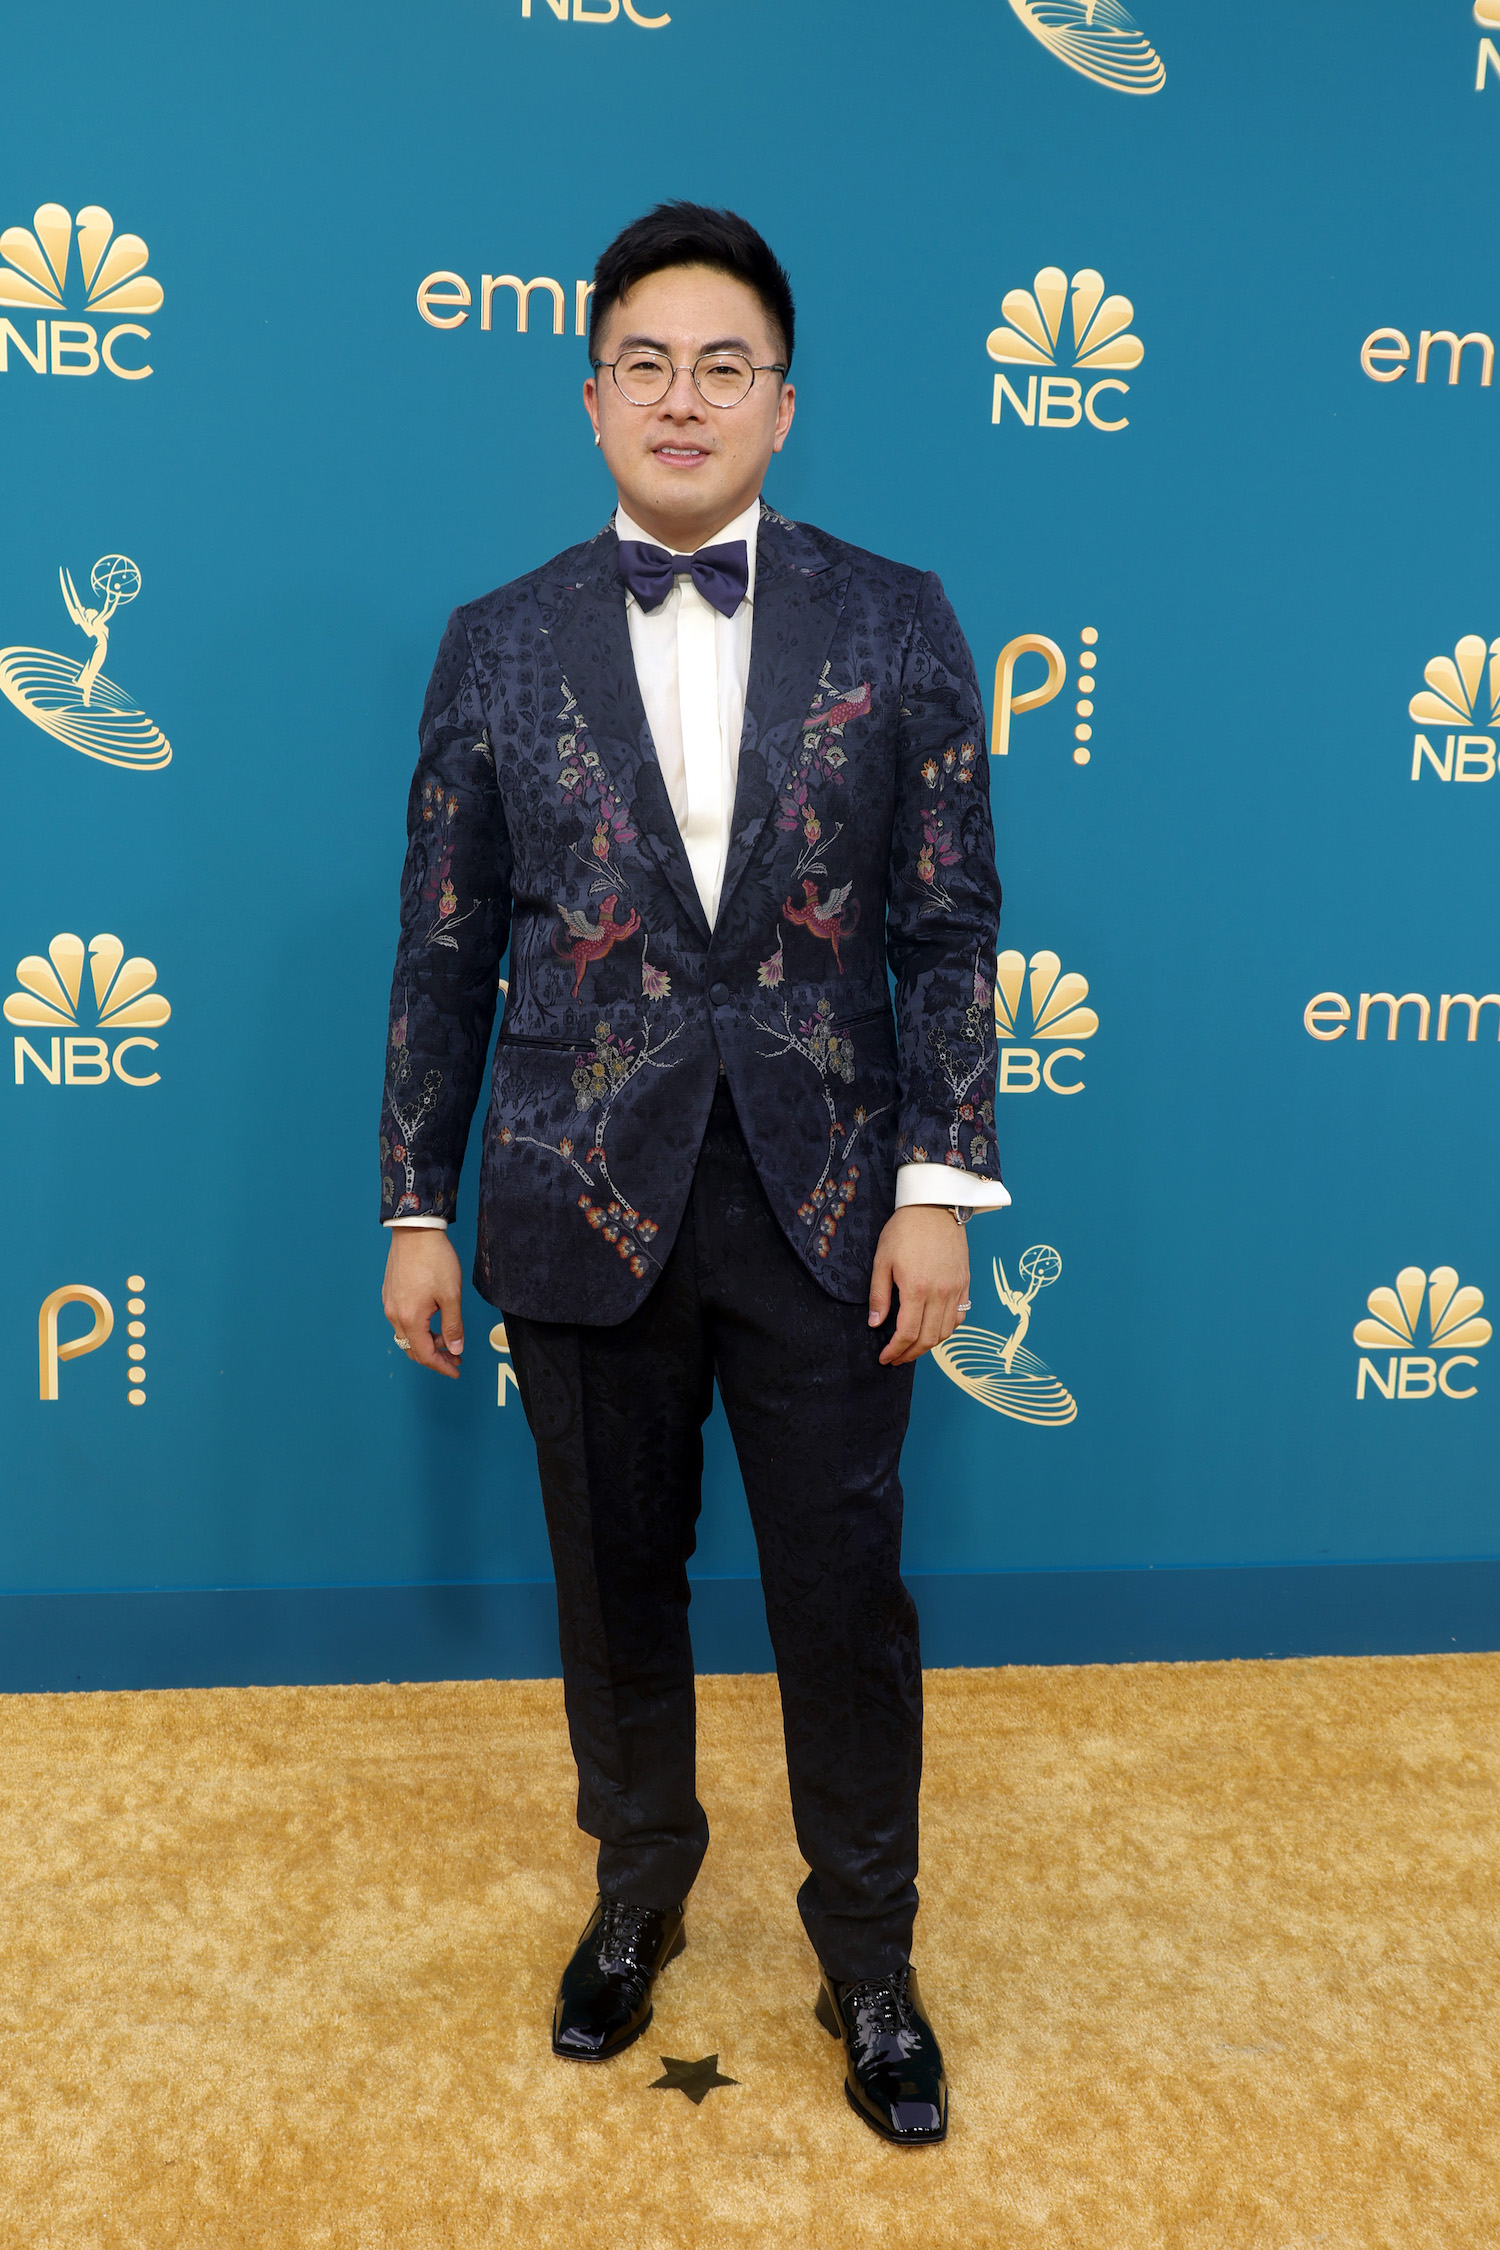 Bowen Yang attends the 74th Primetime Emmys